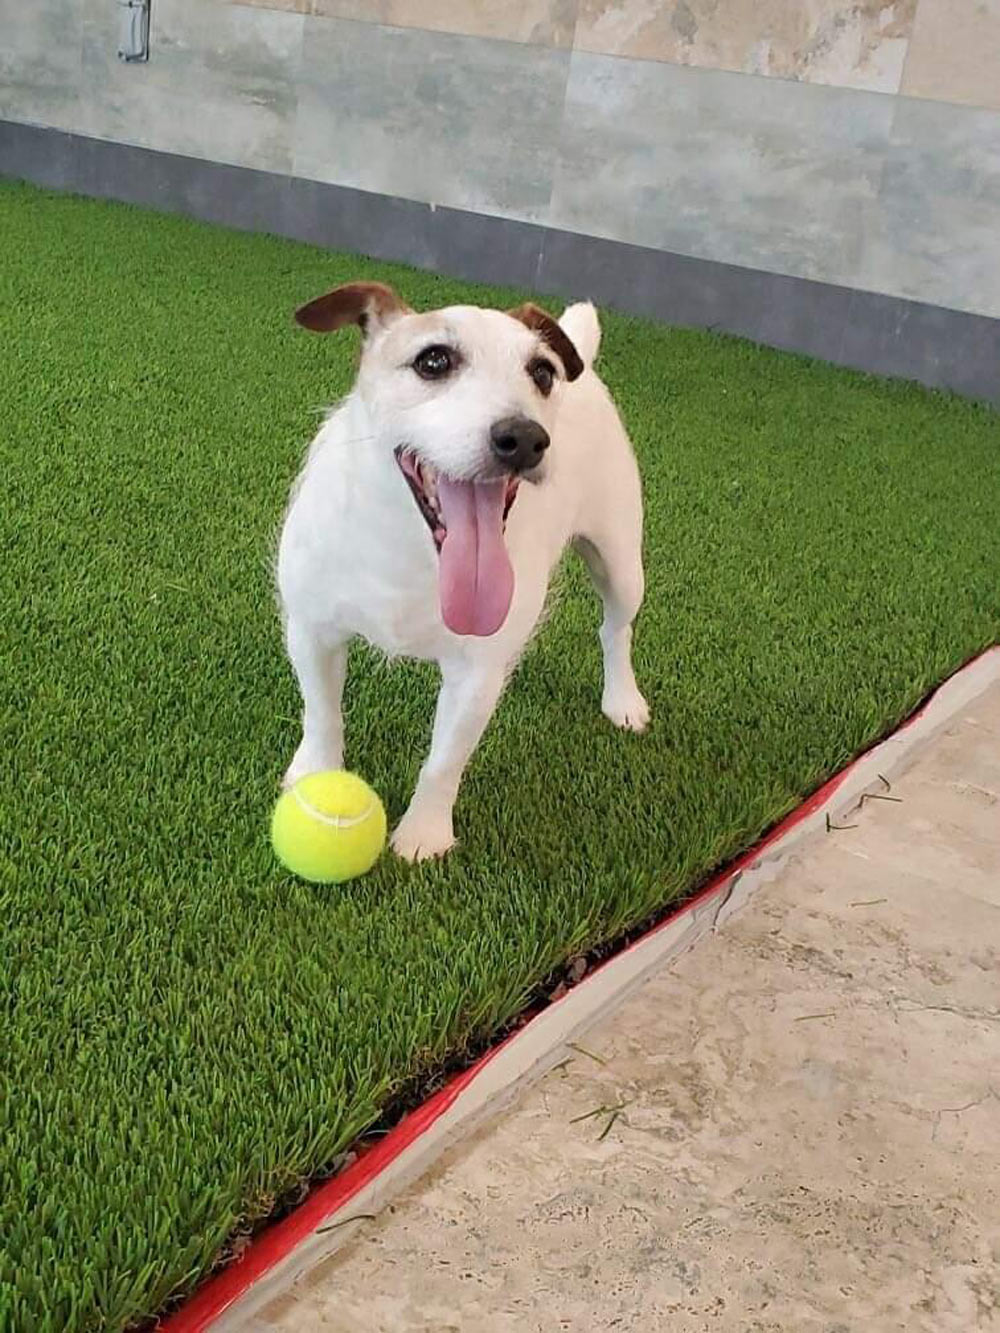 Meet Rocky. He’s Rod G. of San Antonio’s 14-year-old deaf rescued Jack Russell. Rod says he’s a happy little guy, and they have helped each other through some tough times.